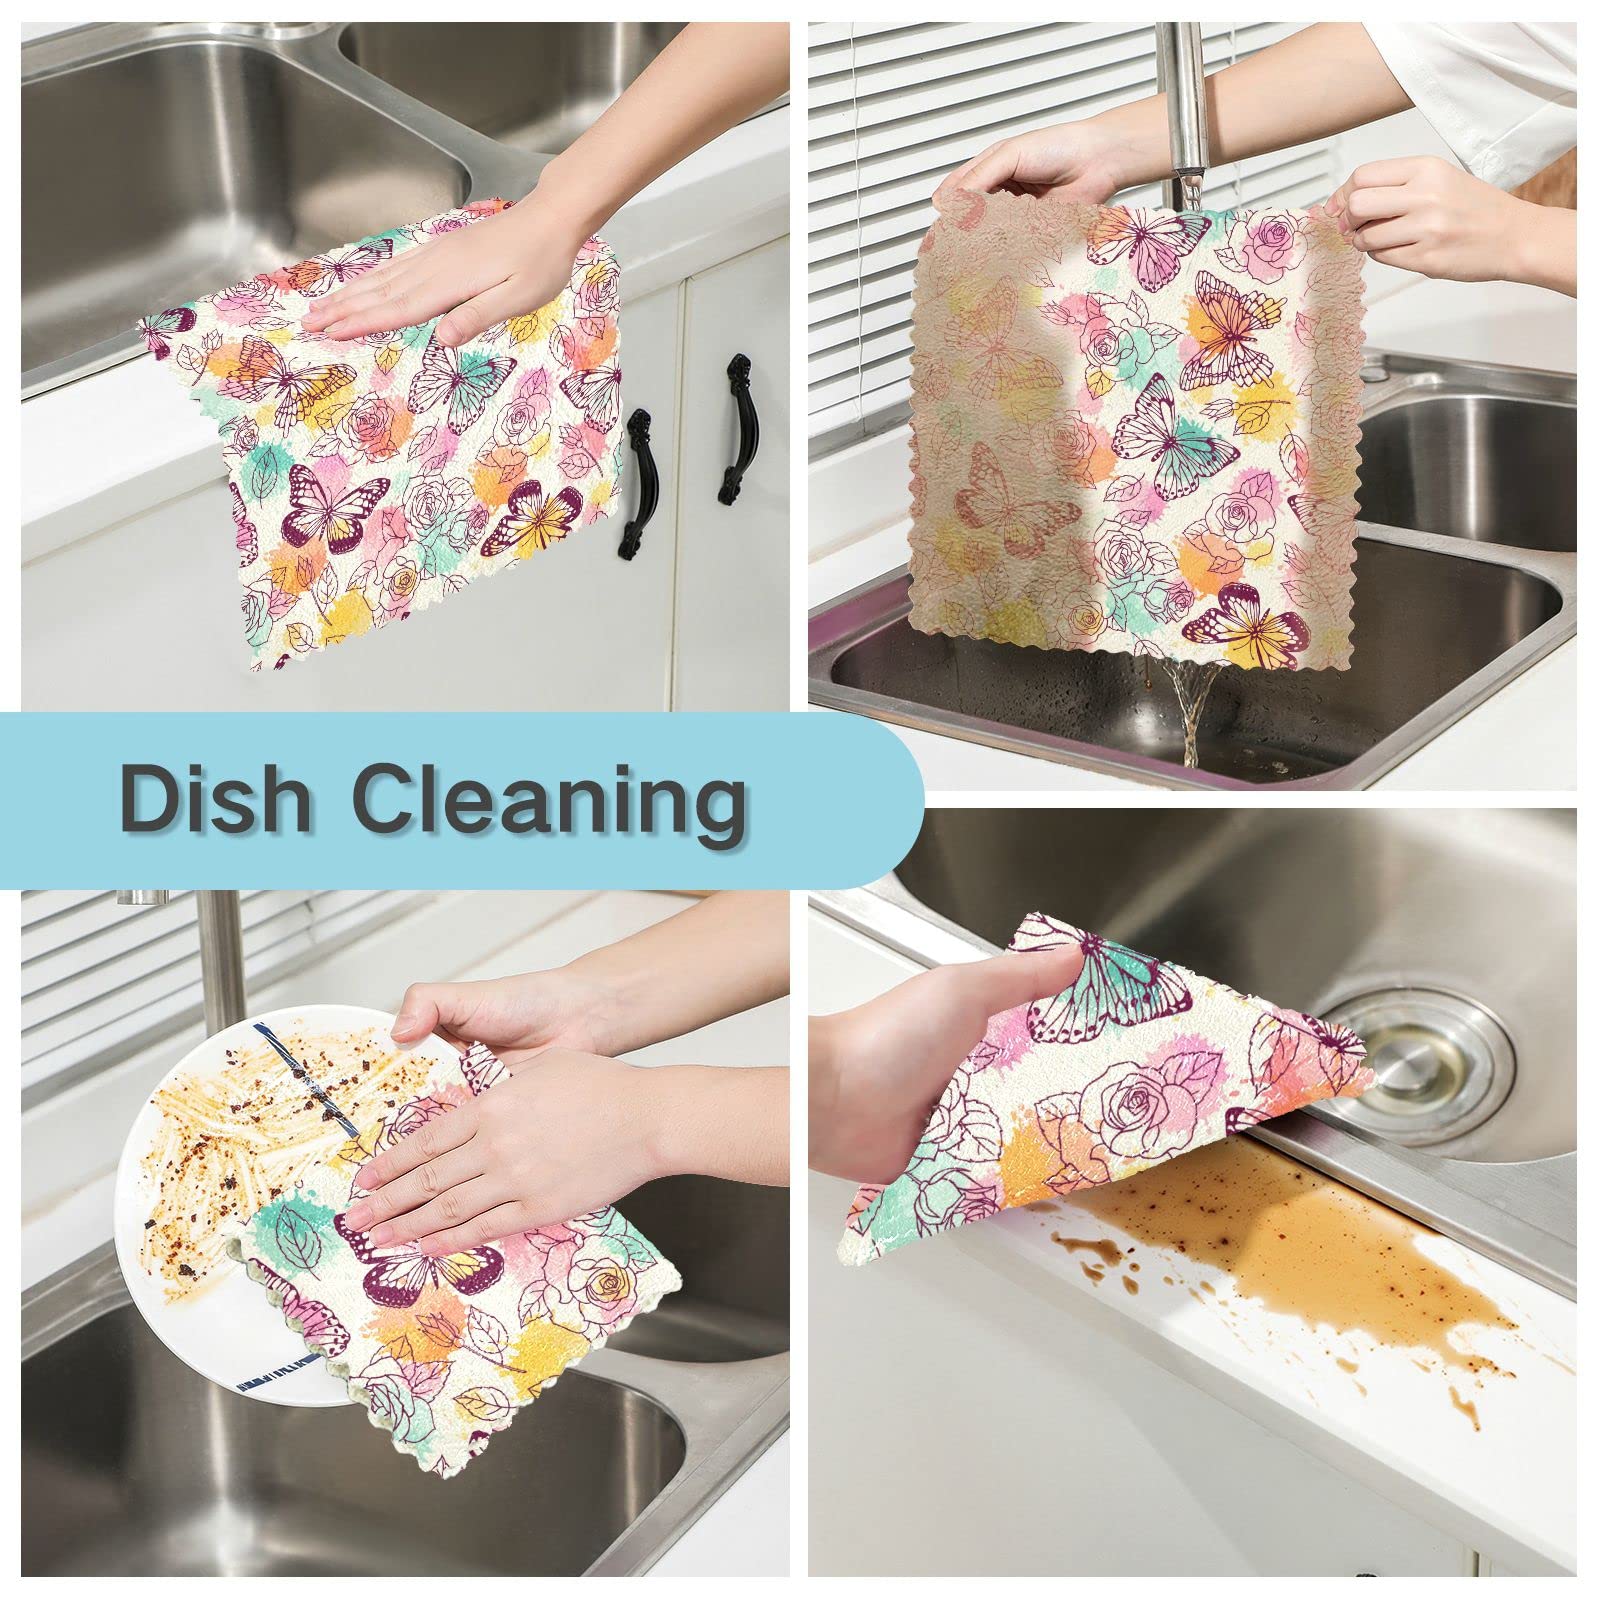 JIPONI 6 Pack Kitchen Dishcloth, Butterfly and Rose Absorbent Dish Towels Reusable Soft Cleaning Cloths 11 x 11 inch